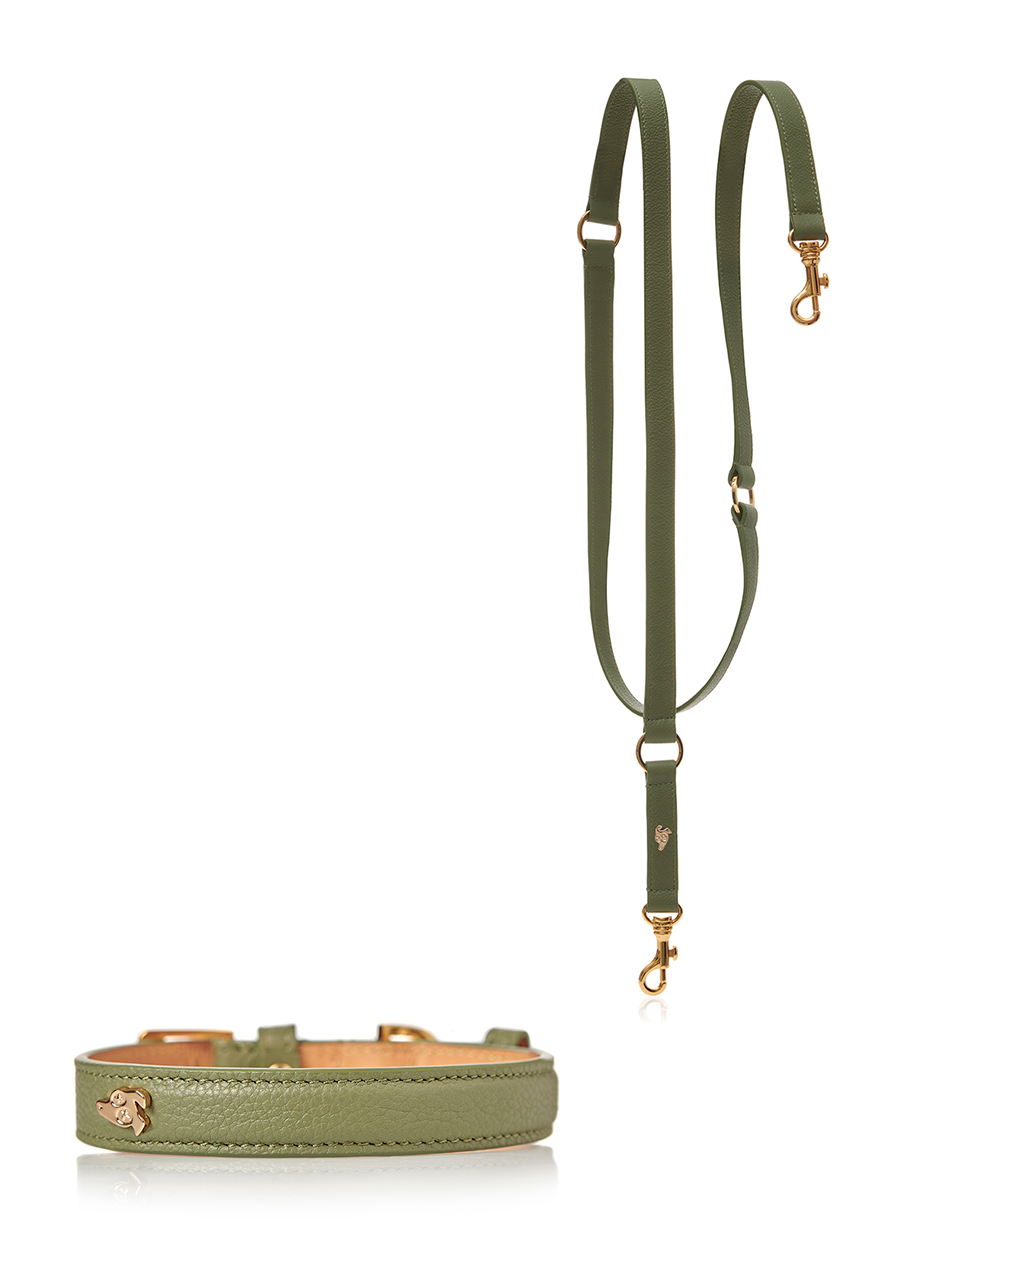 Matching Dog Collar + Leash in Small Grained Leather - Olive